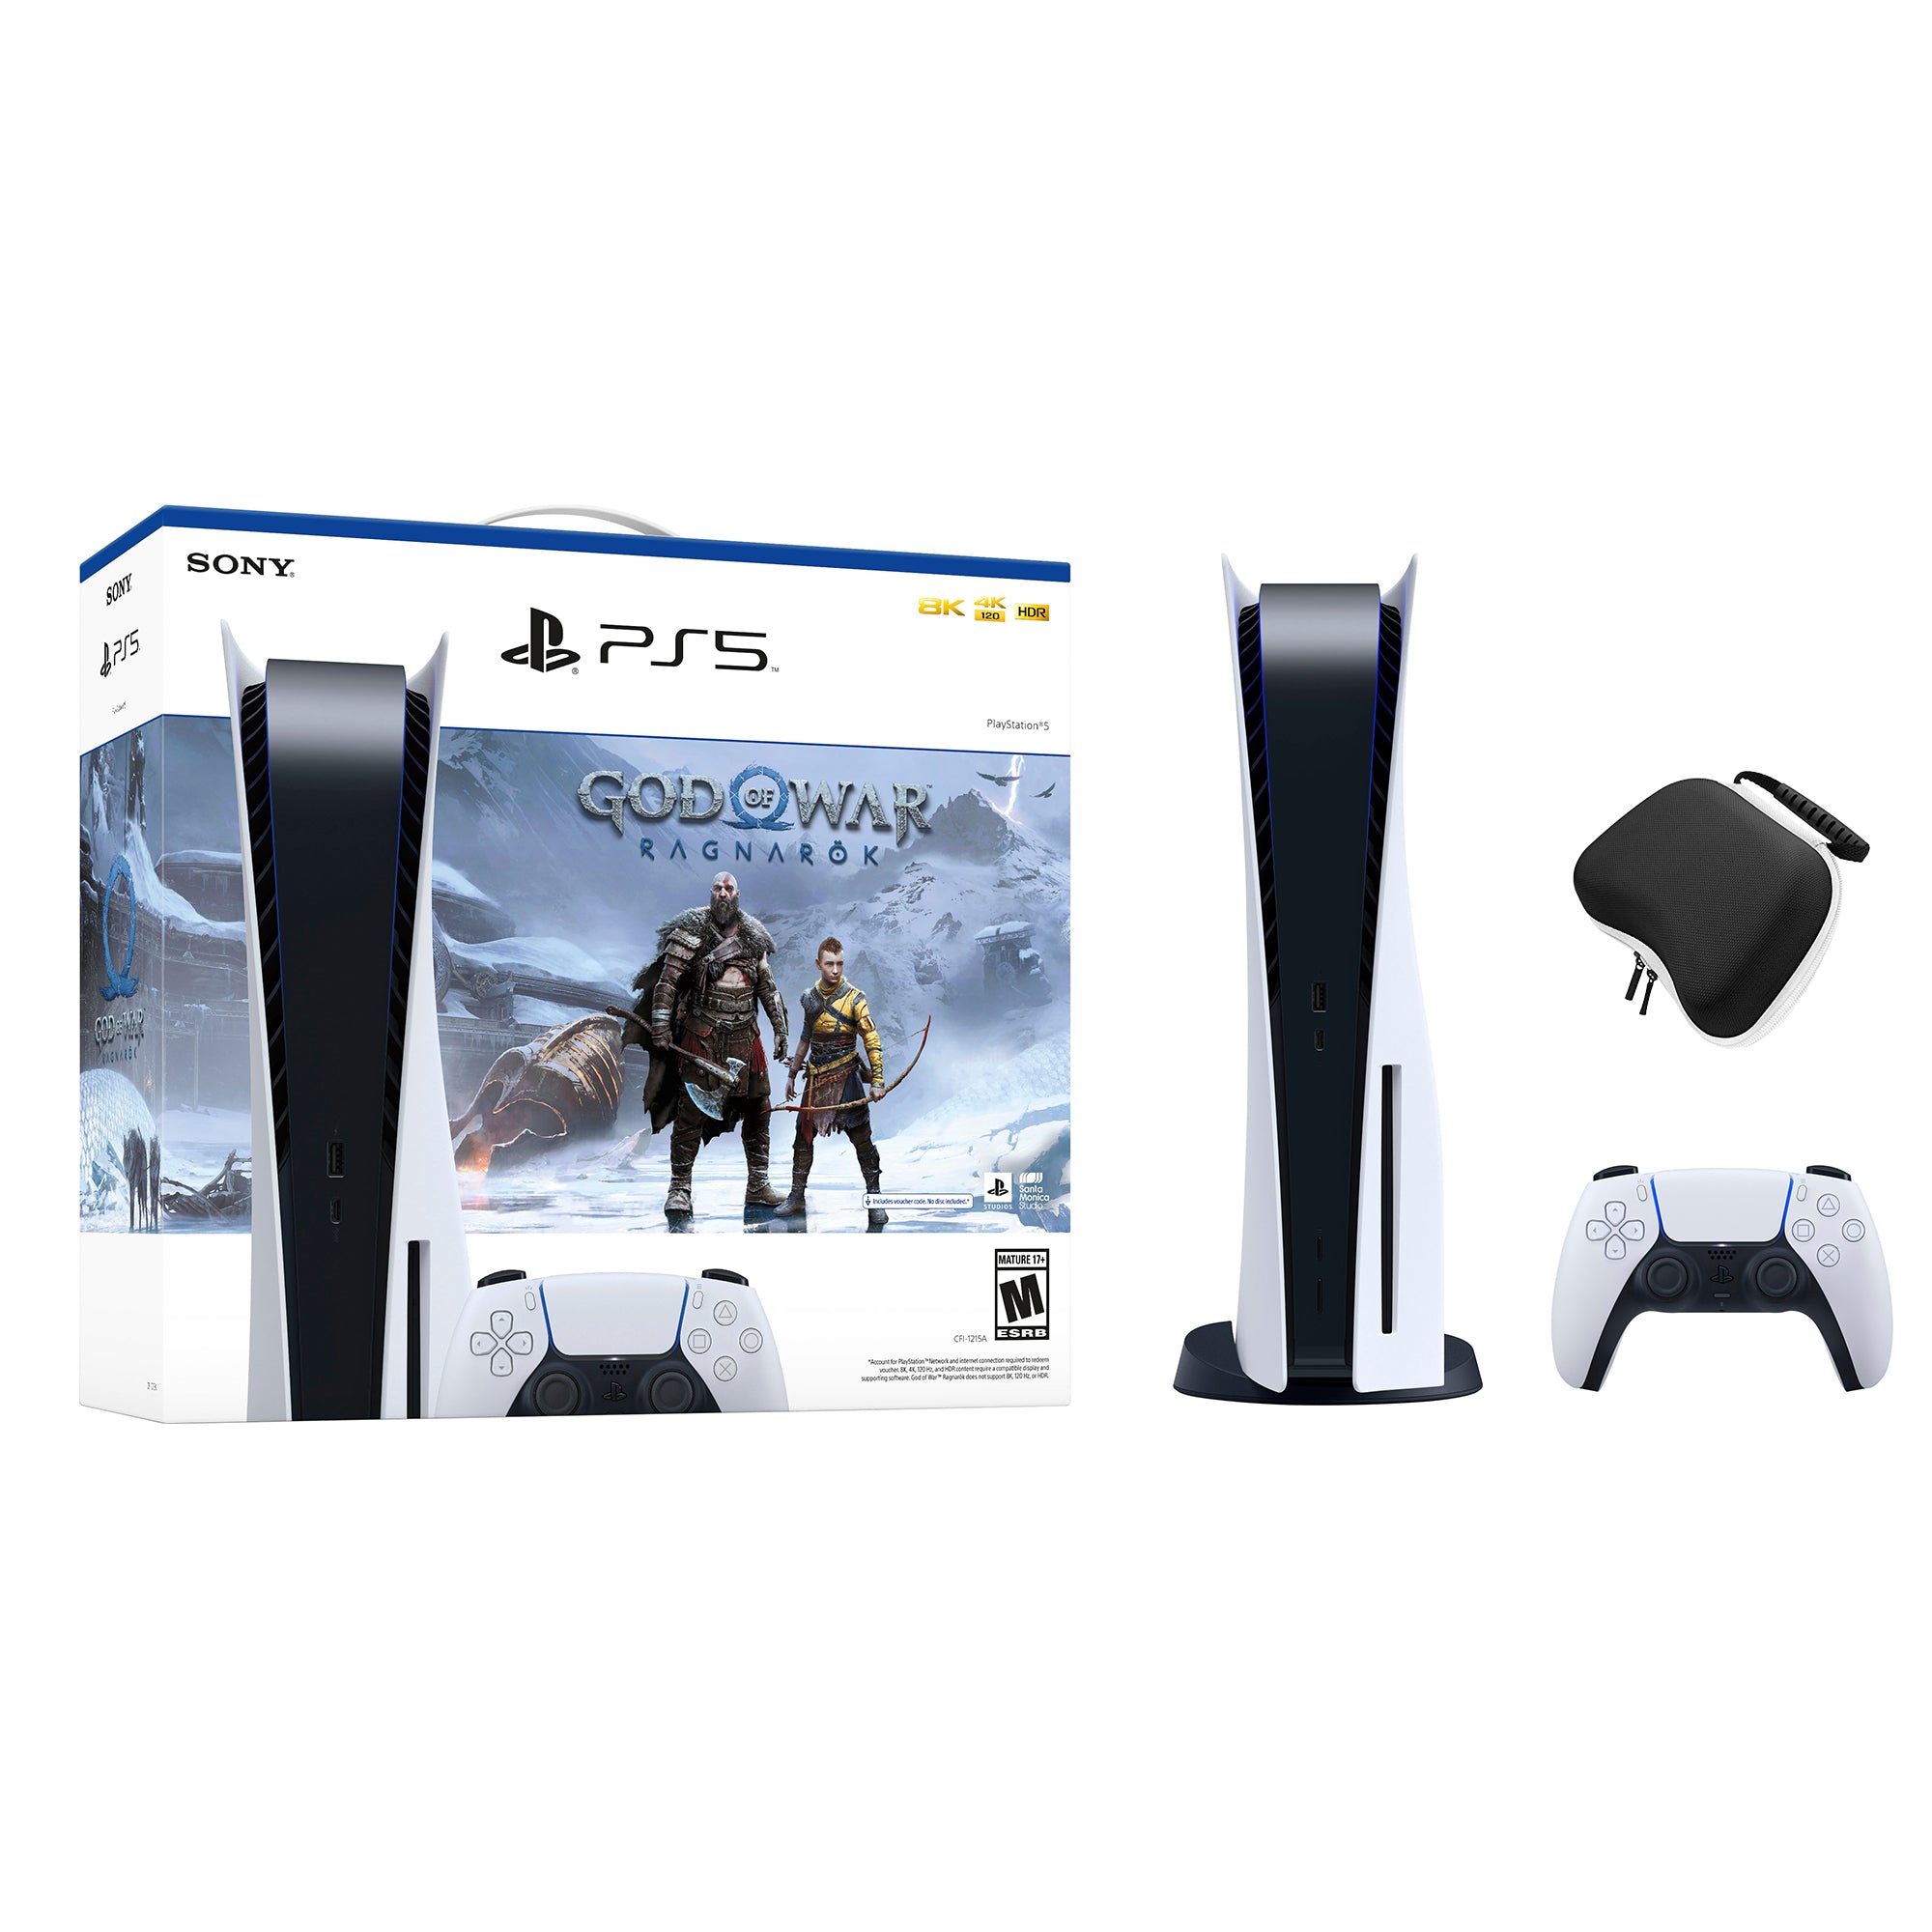 PlayStation 5 Disc Edition God of War Ragnarok Bundle and Mytrix Controller Case - White, PS5 825GB Gaming Console